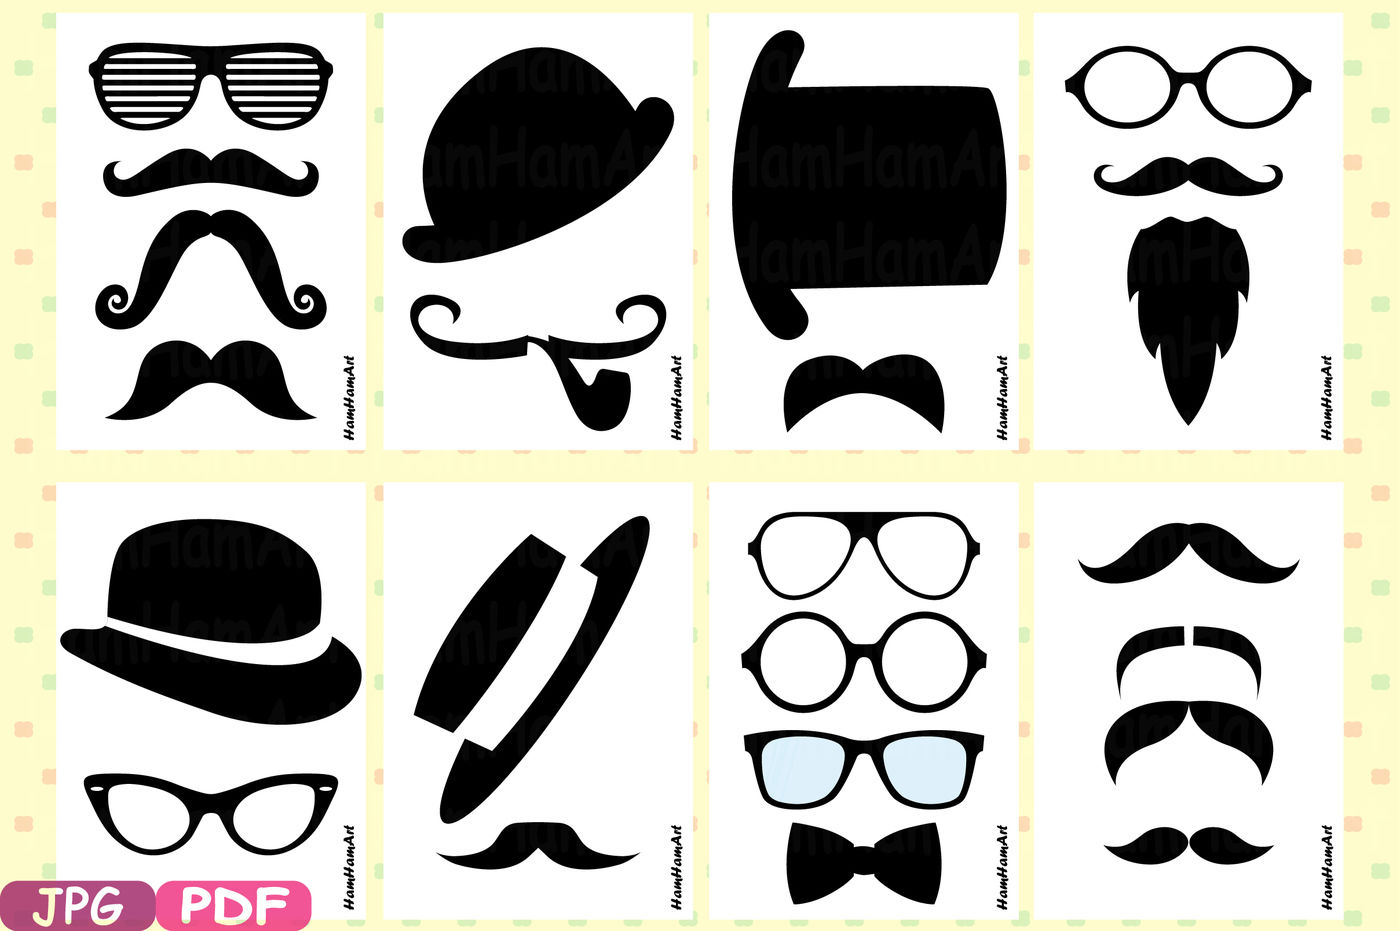 Props Black Mustache Retro Party Photo Booth Prop Gentleman Cutting Files Jpg Pdf Clip Art Clipart Digital Graphics Commercial Use 2p By Hamhamart Thehungryjpeg Com